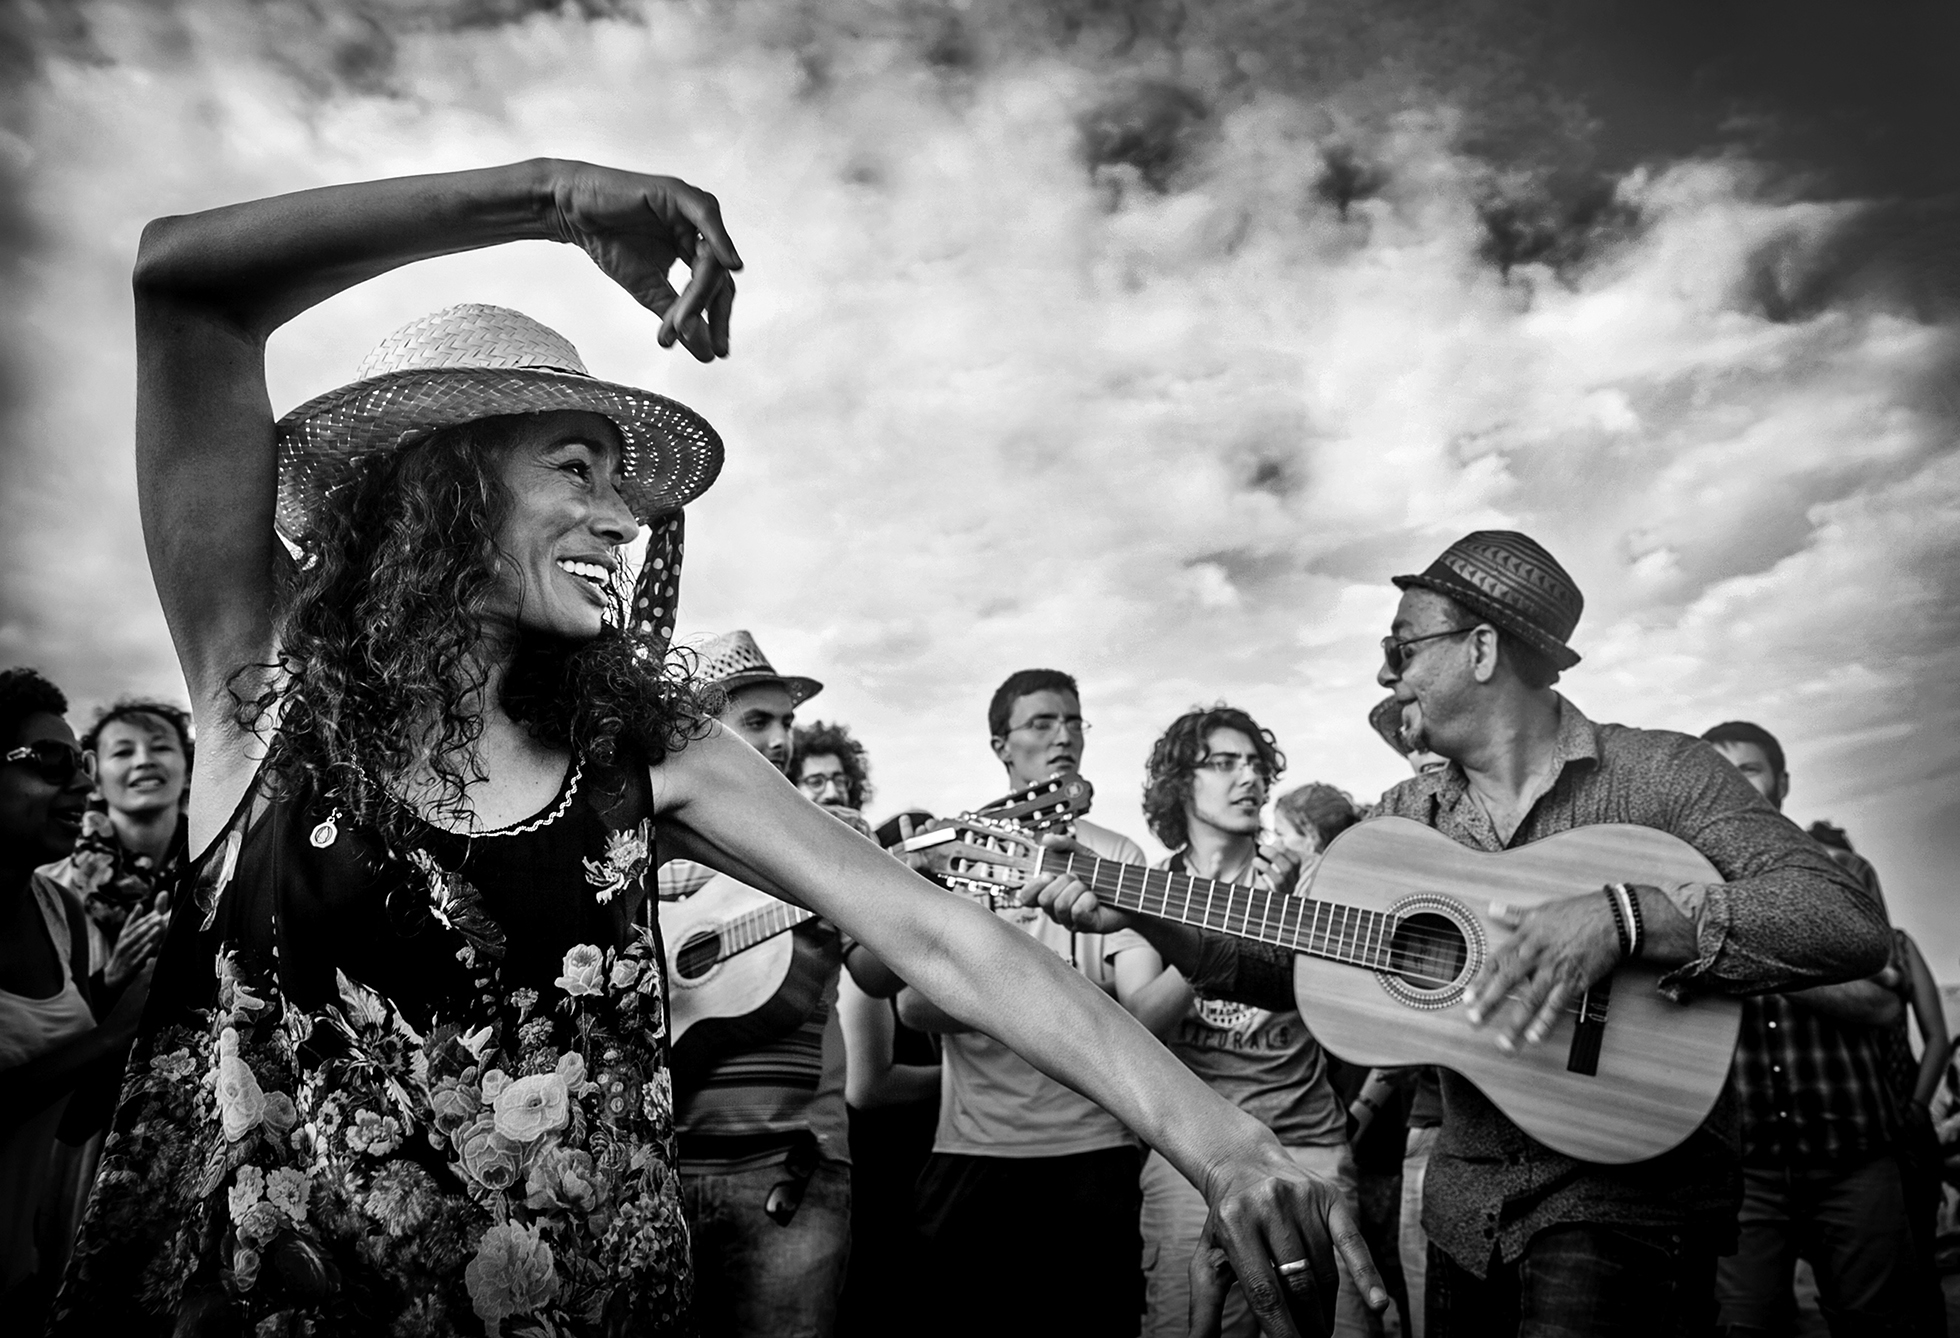 A woman on the left is in a floral shirt and straw hat and is dancing with a big smile. To the right is a man playing a guitar and he's looking over at another man playing a guitar. A group of joyous people surround them.